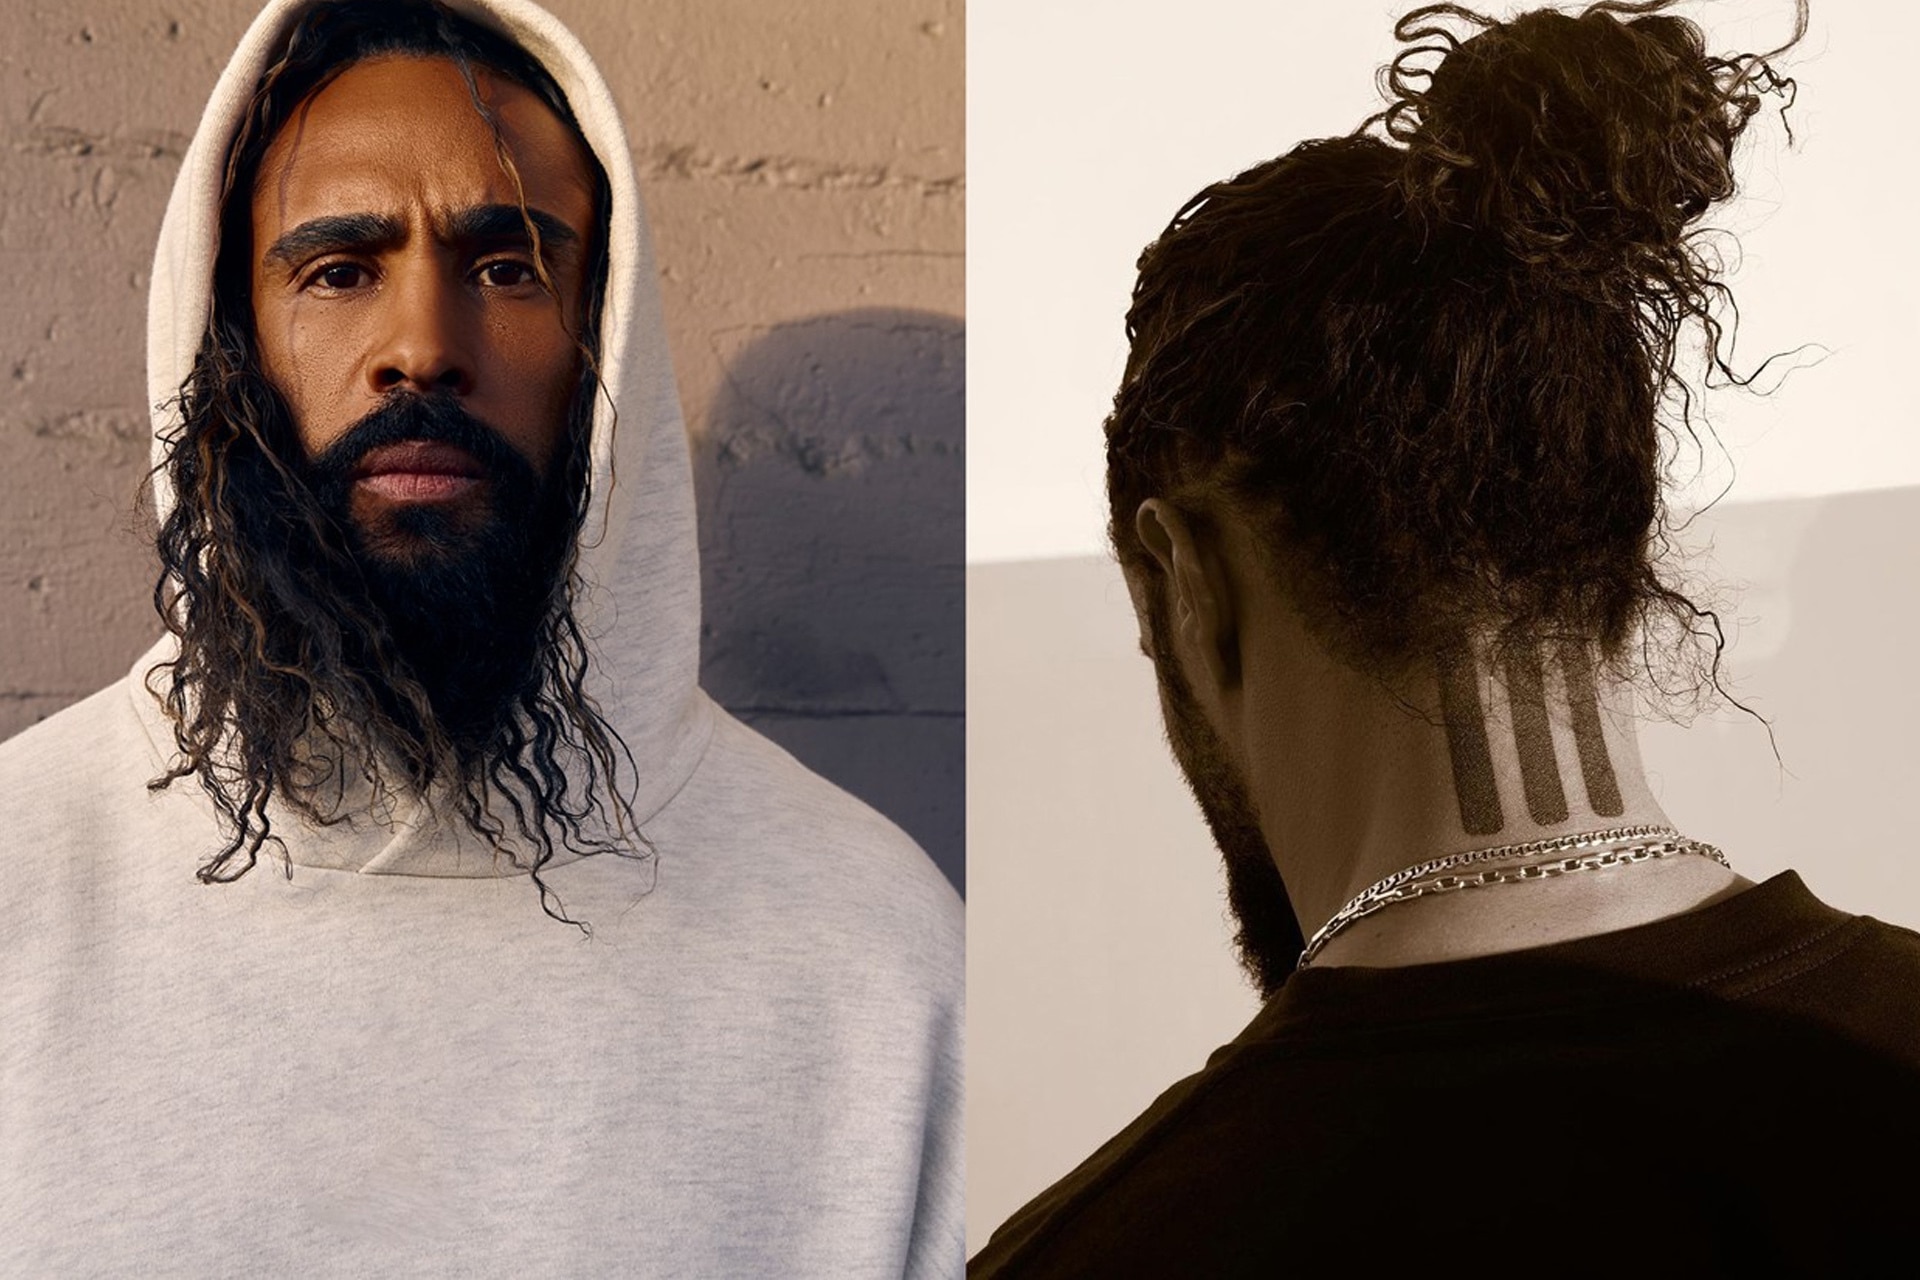 What Pros Wear: Jerry Lorenzo Hired as Global Head of adidas